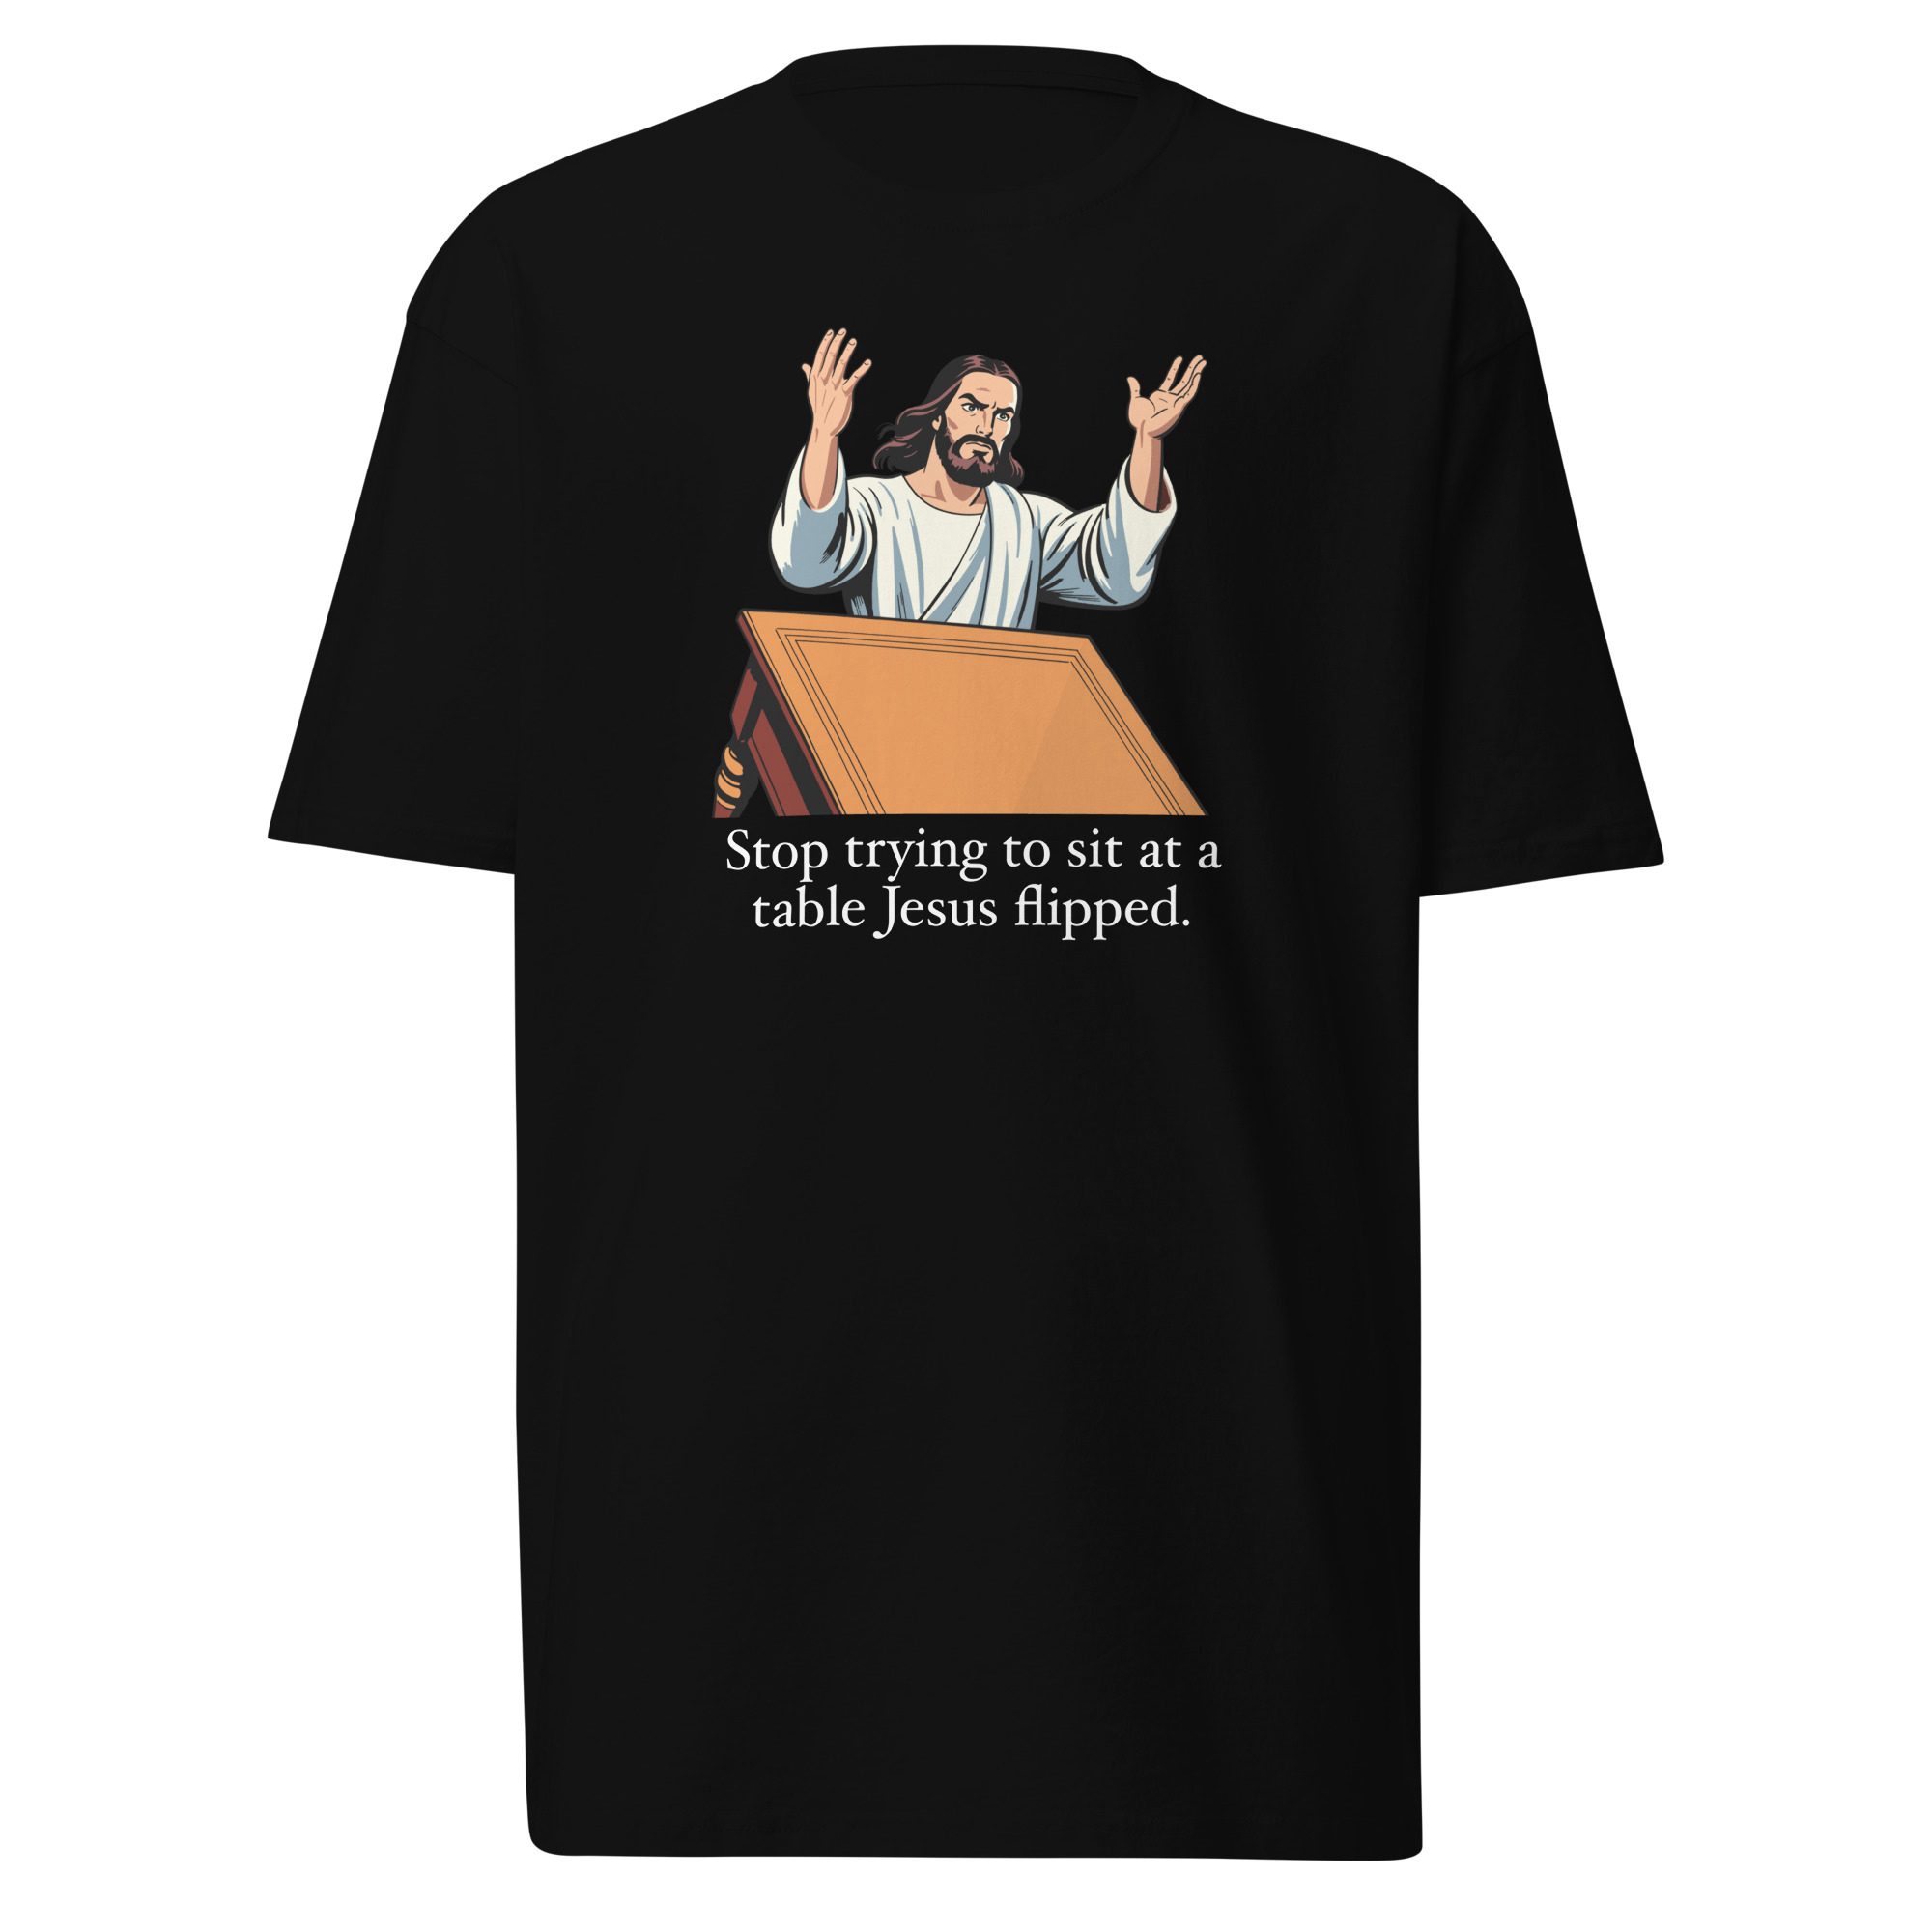 Stop trying to sit at a table Jesus flipped T-Shirt - Black / S